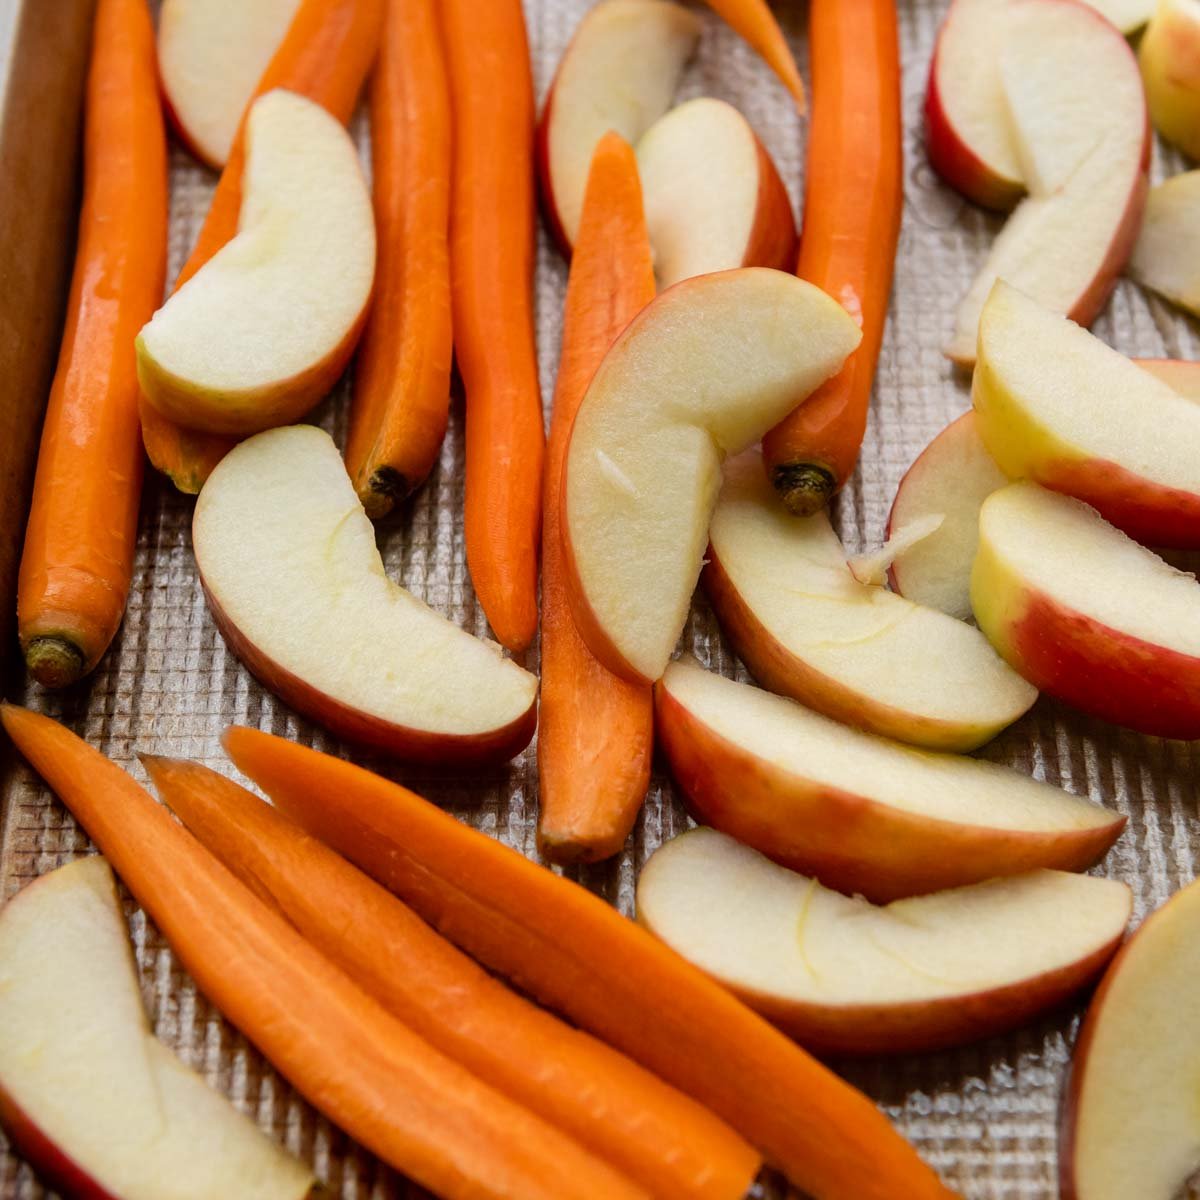 cut, unbaked carrots and apples on a baking pan.